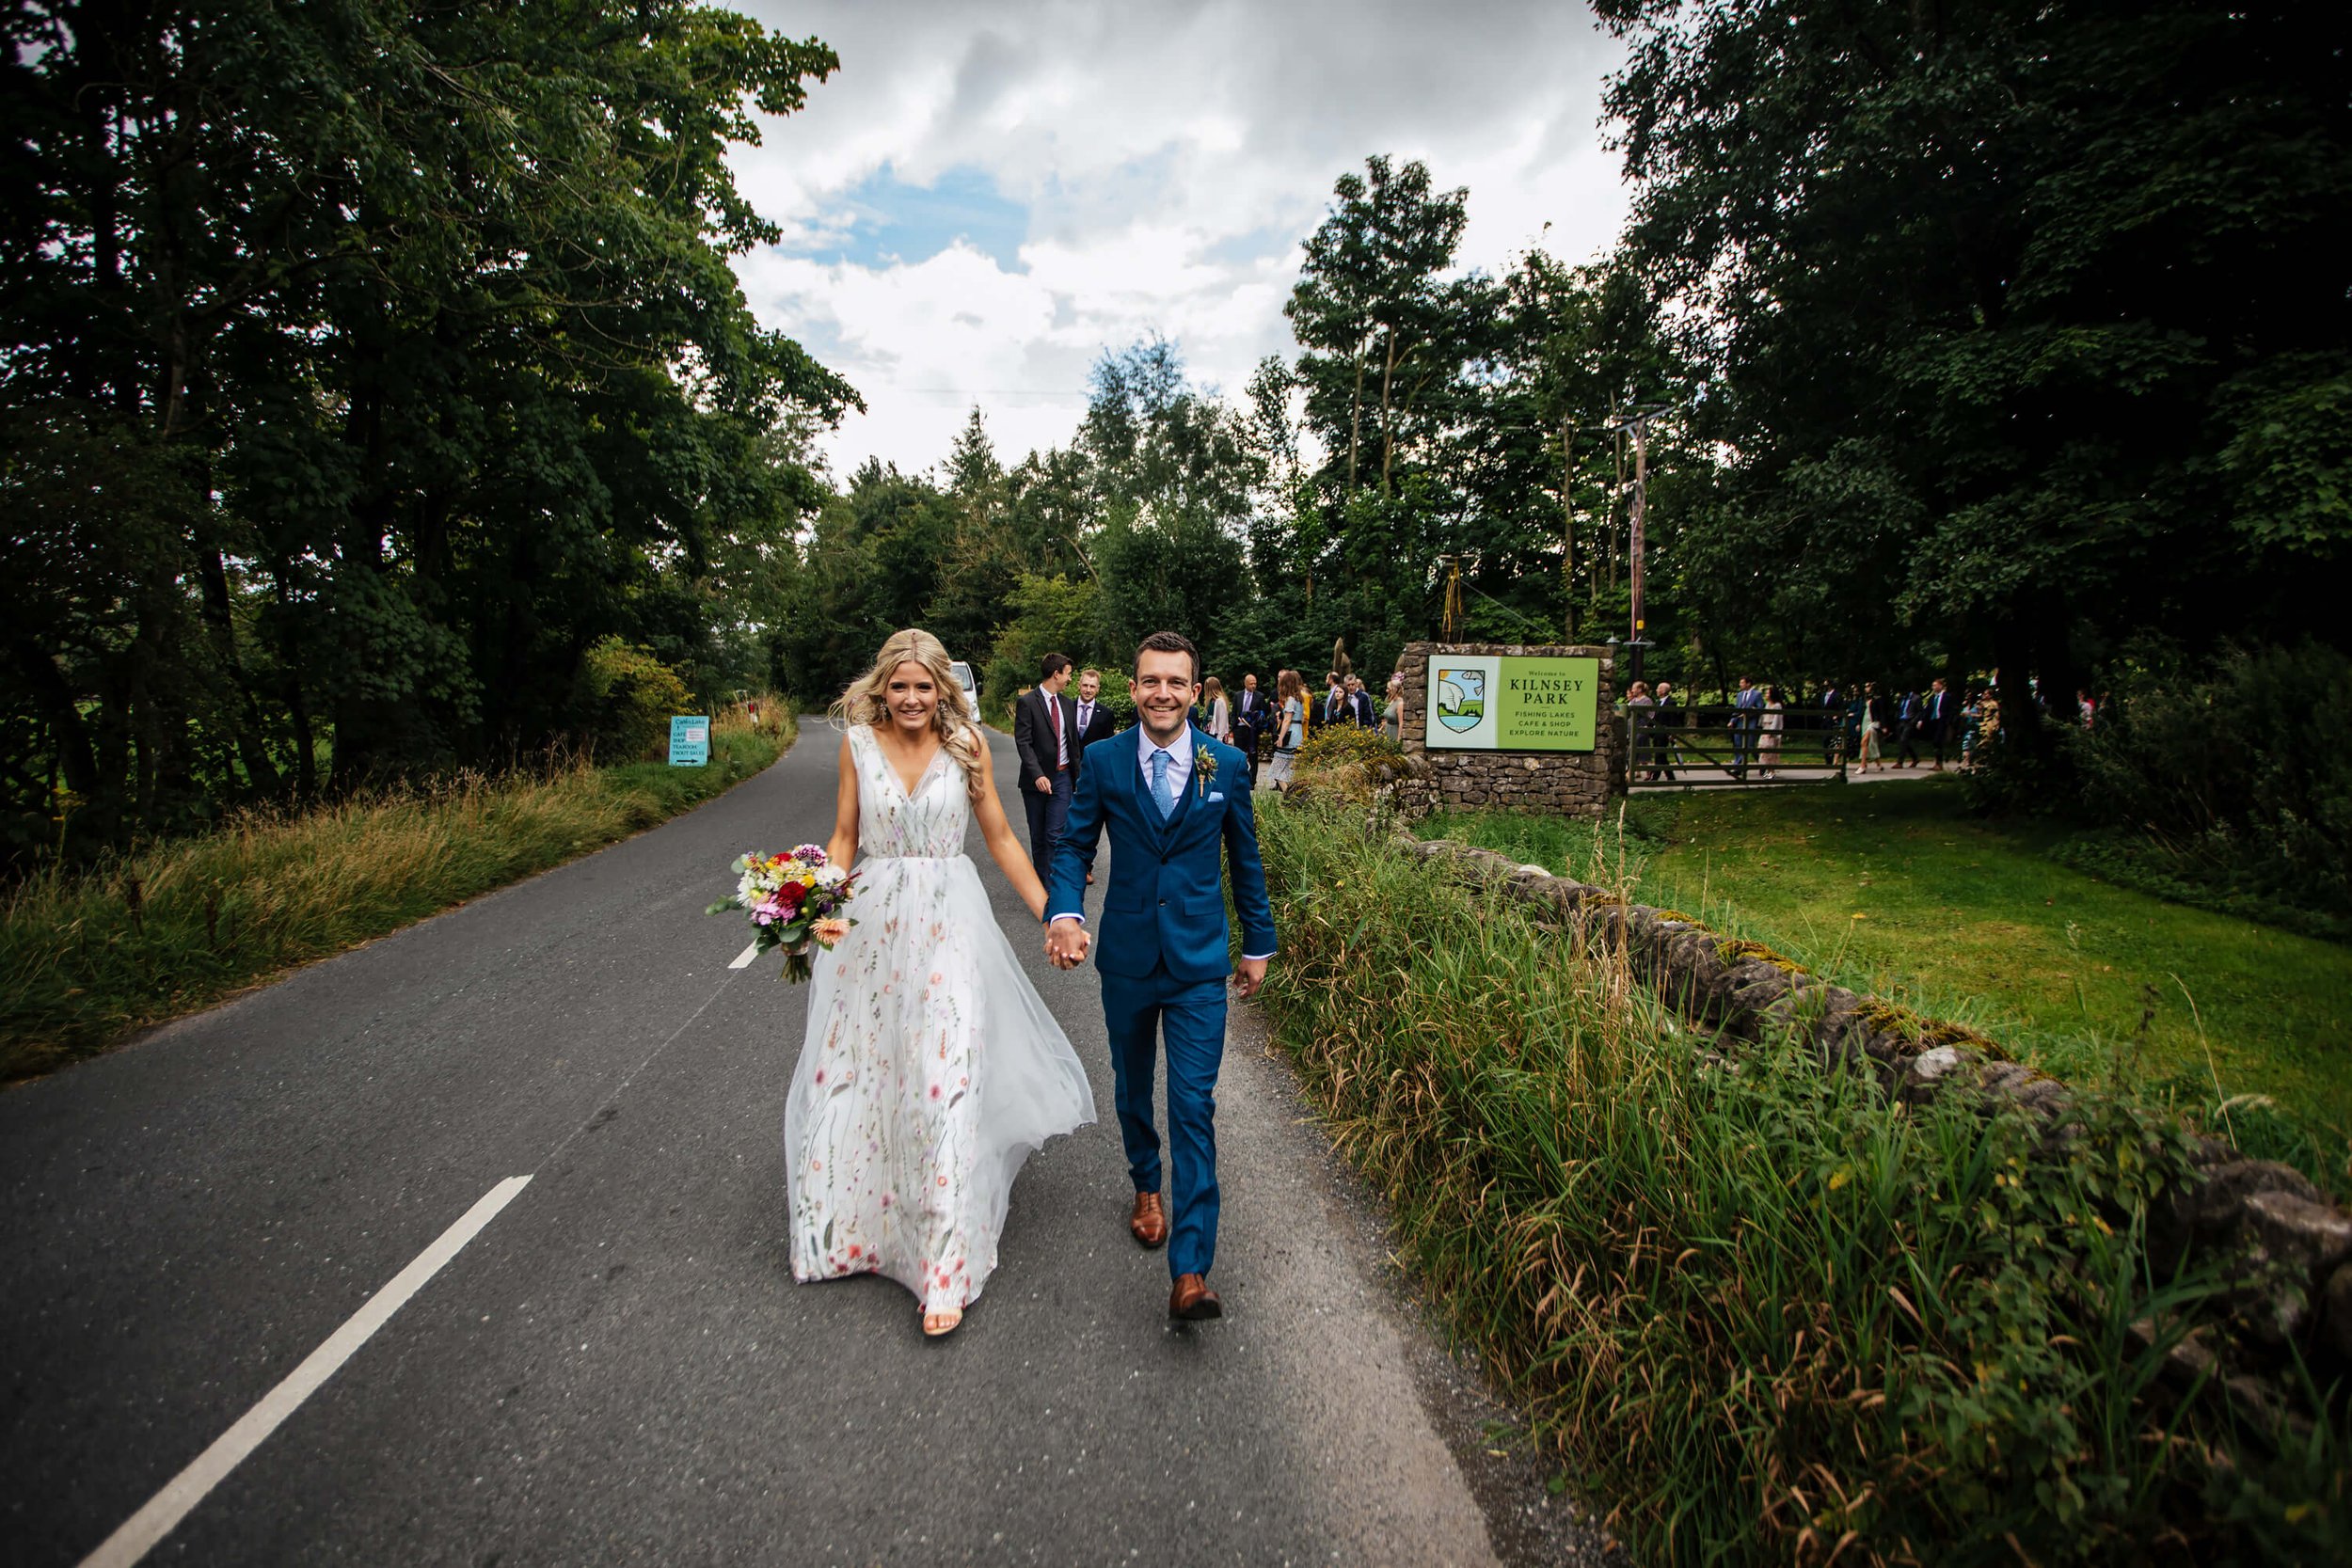 Bride and groom walking down the road at their wedding